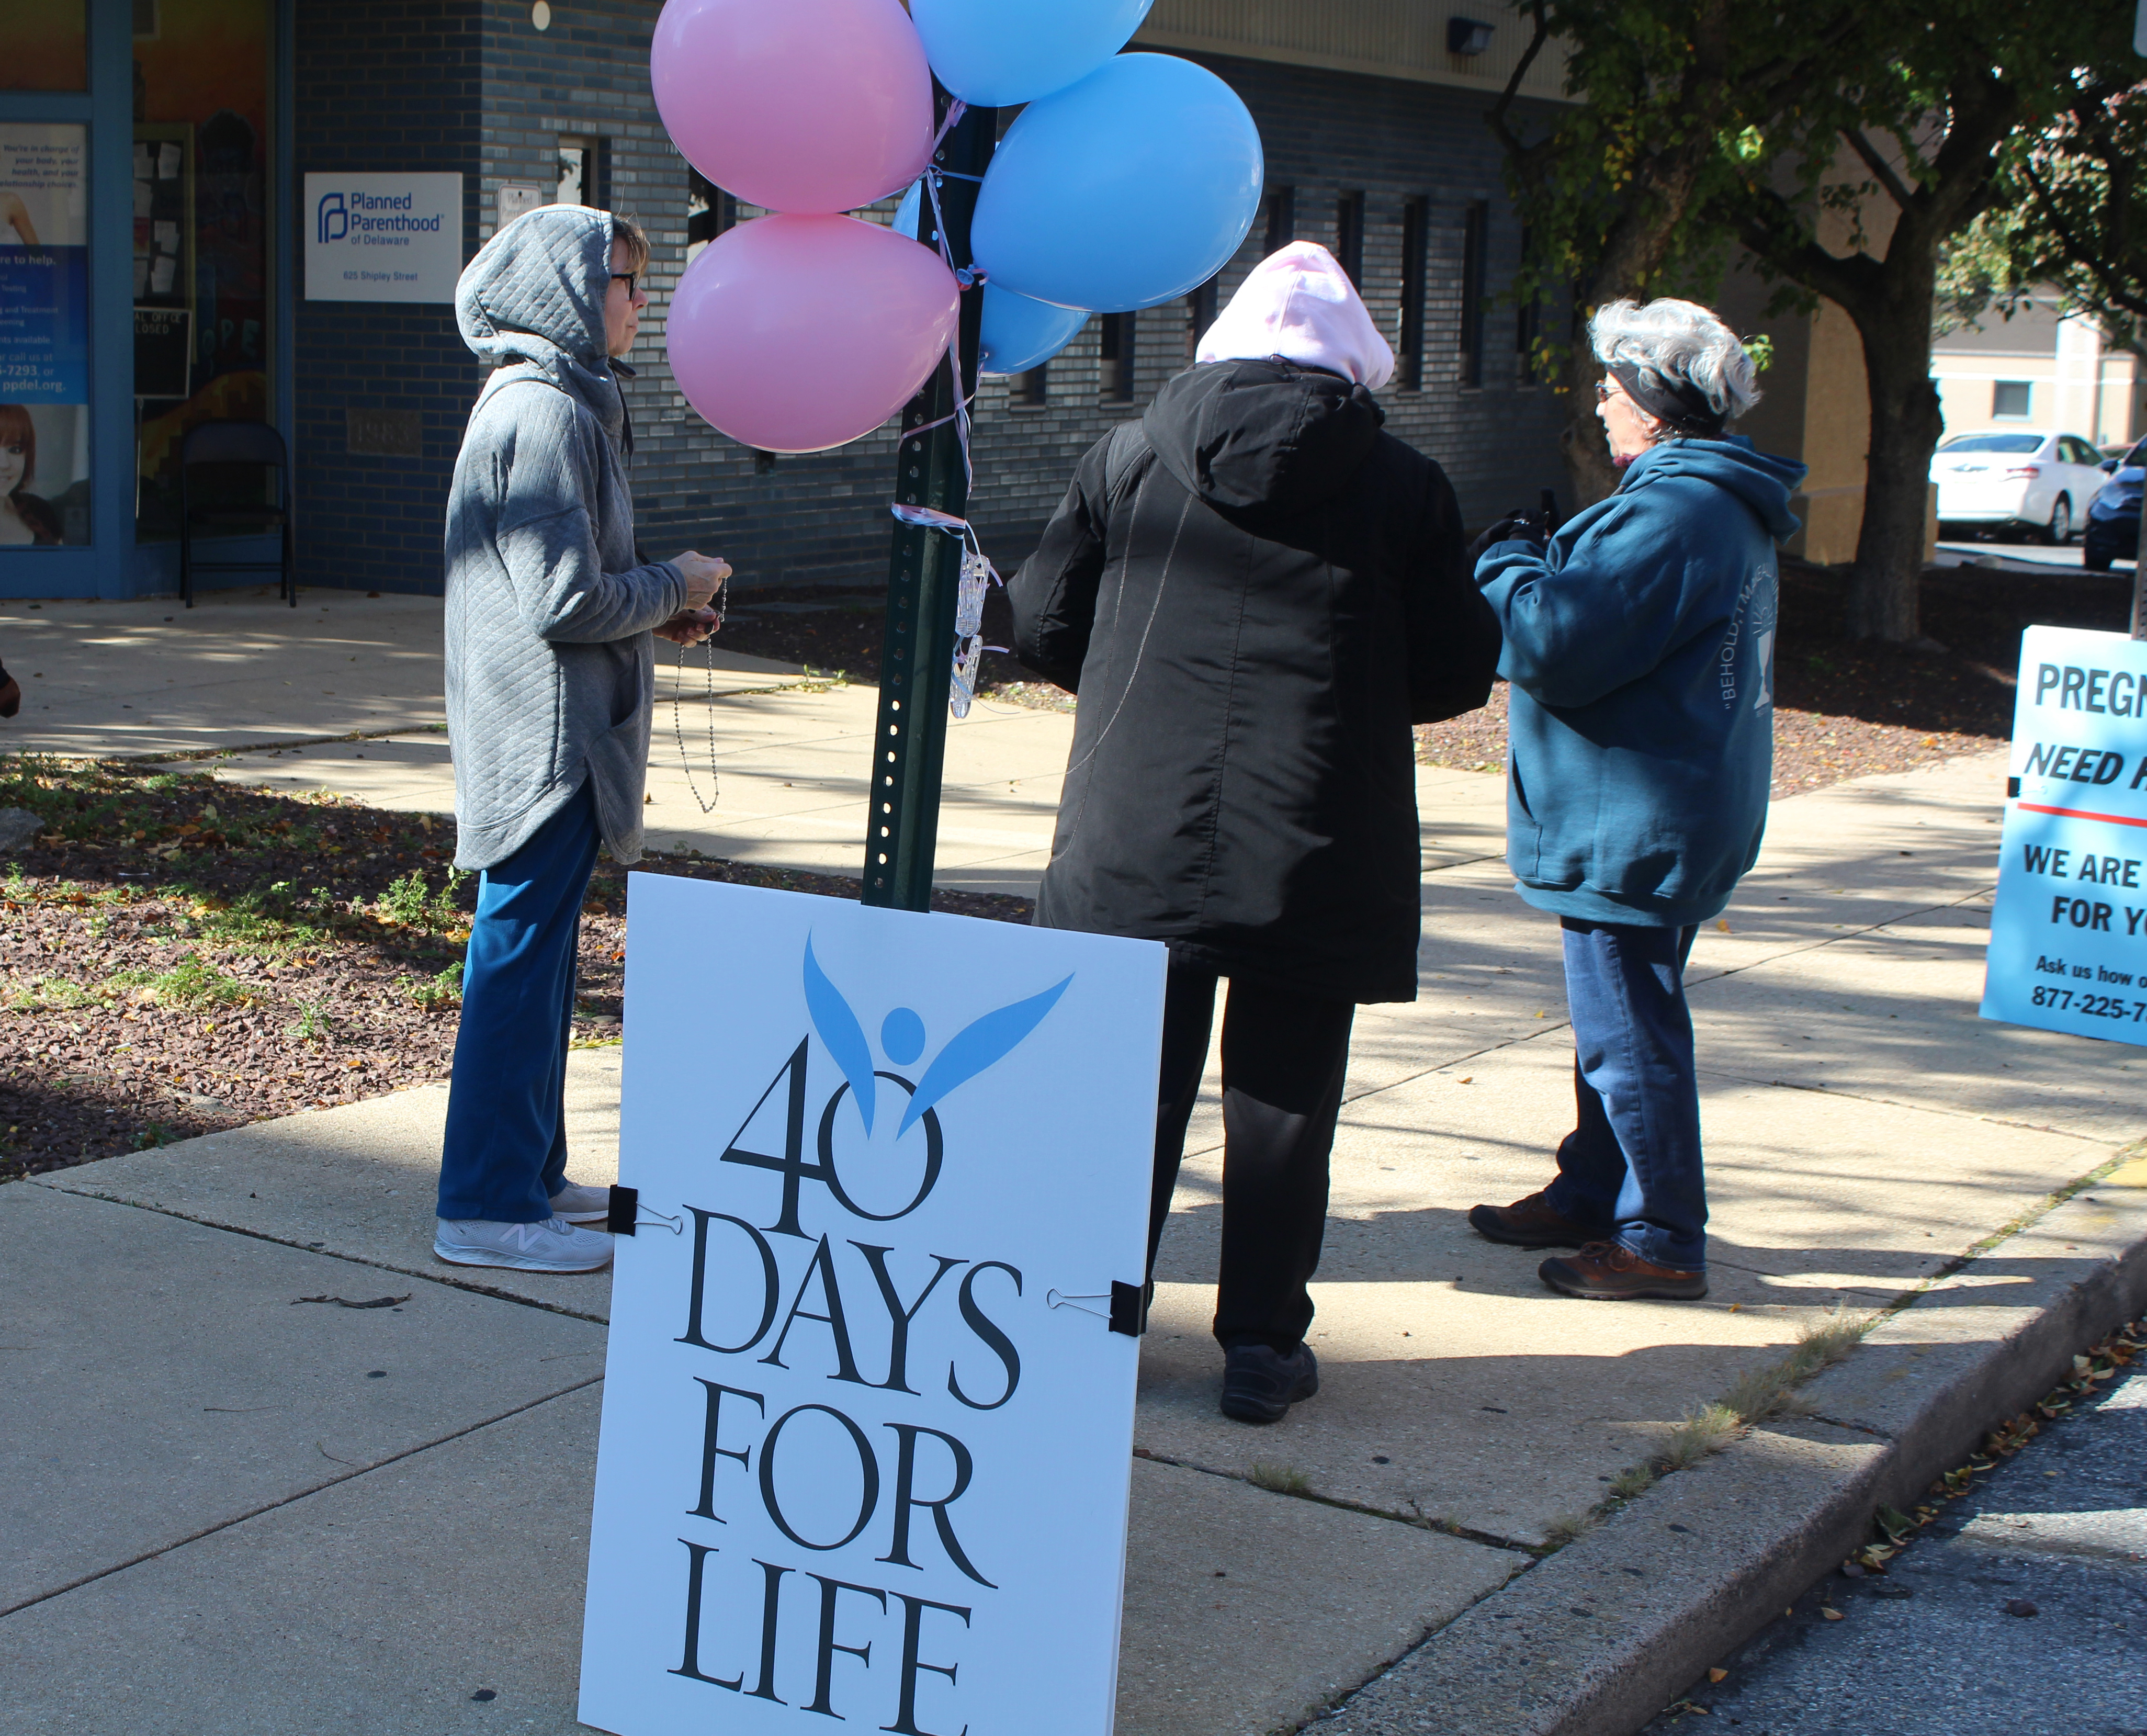 '40 Days for Life' volunteers hold vigil outside Planned Parenthood in Wilmington ...